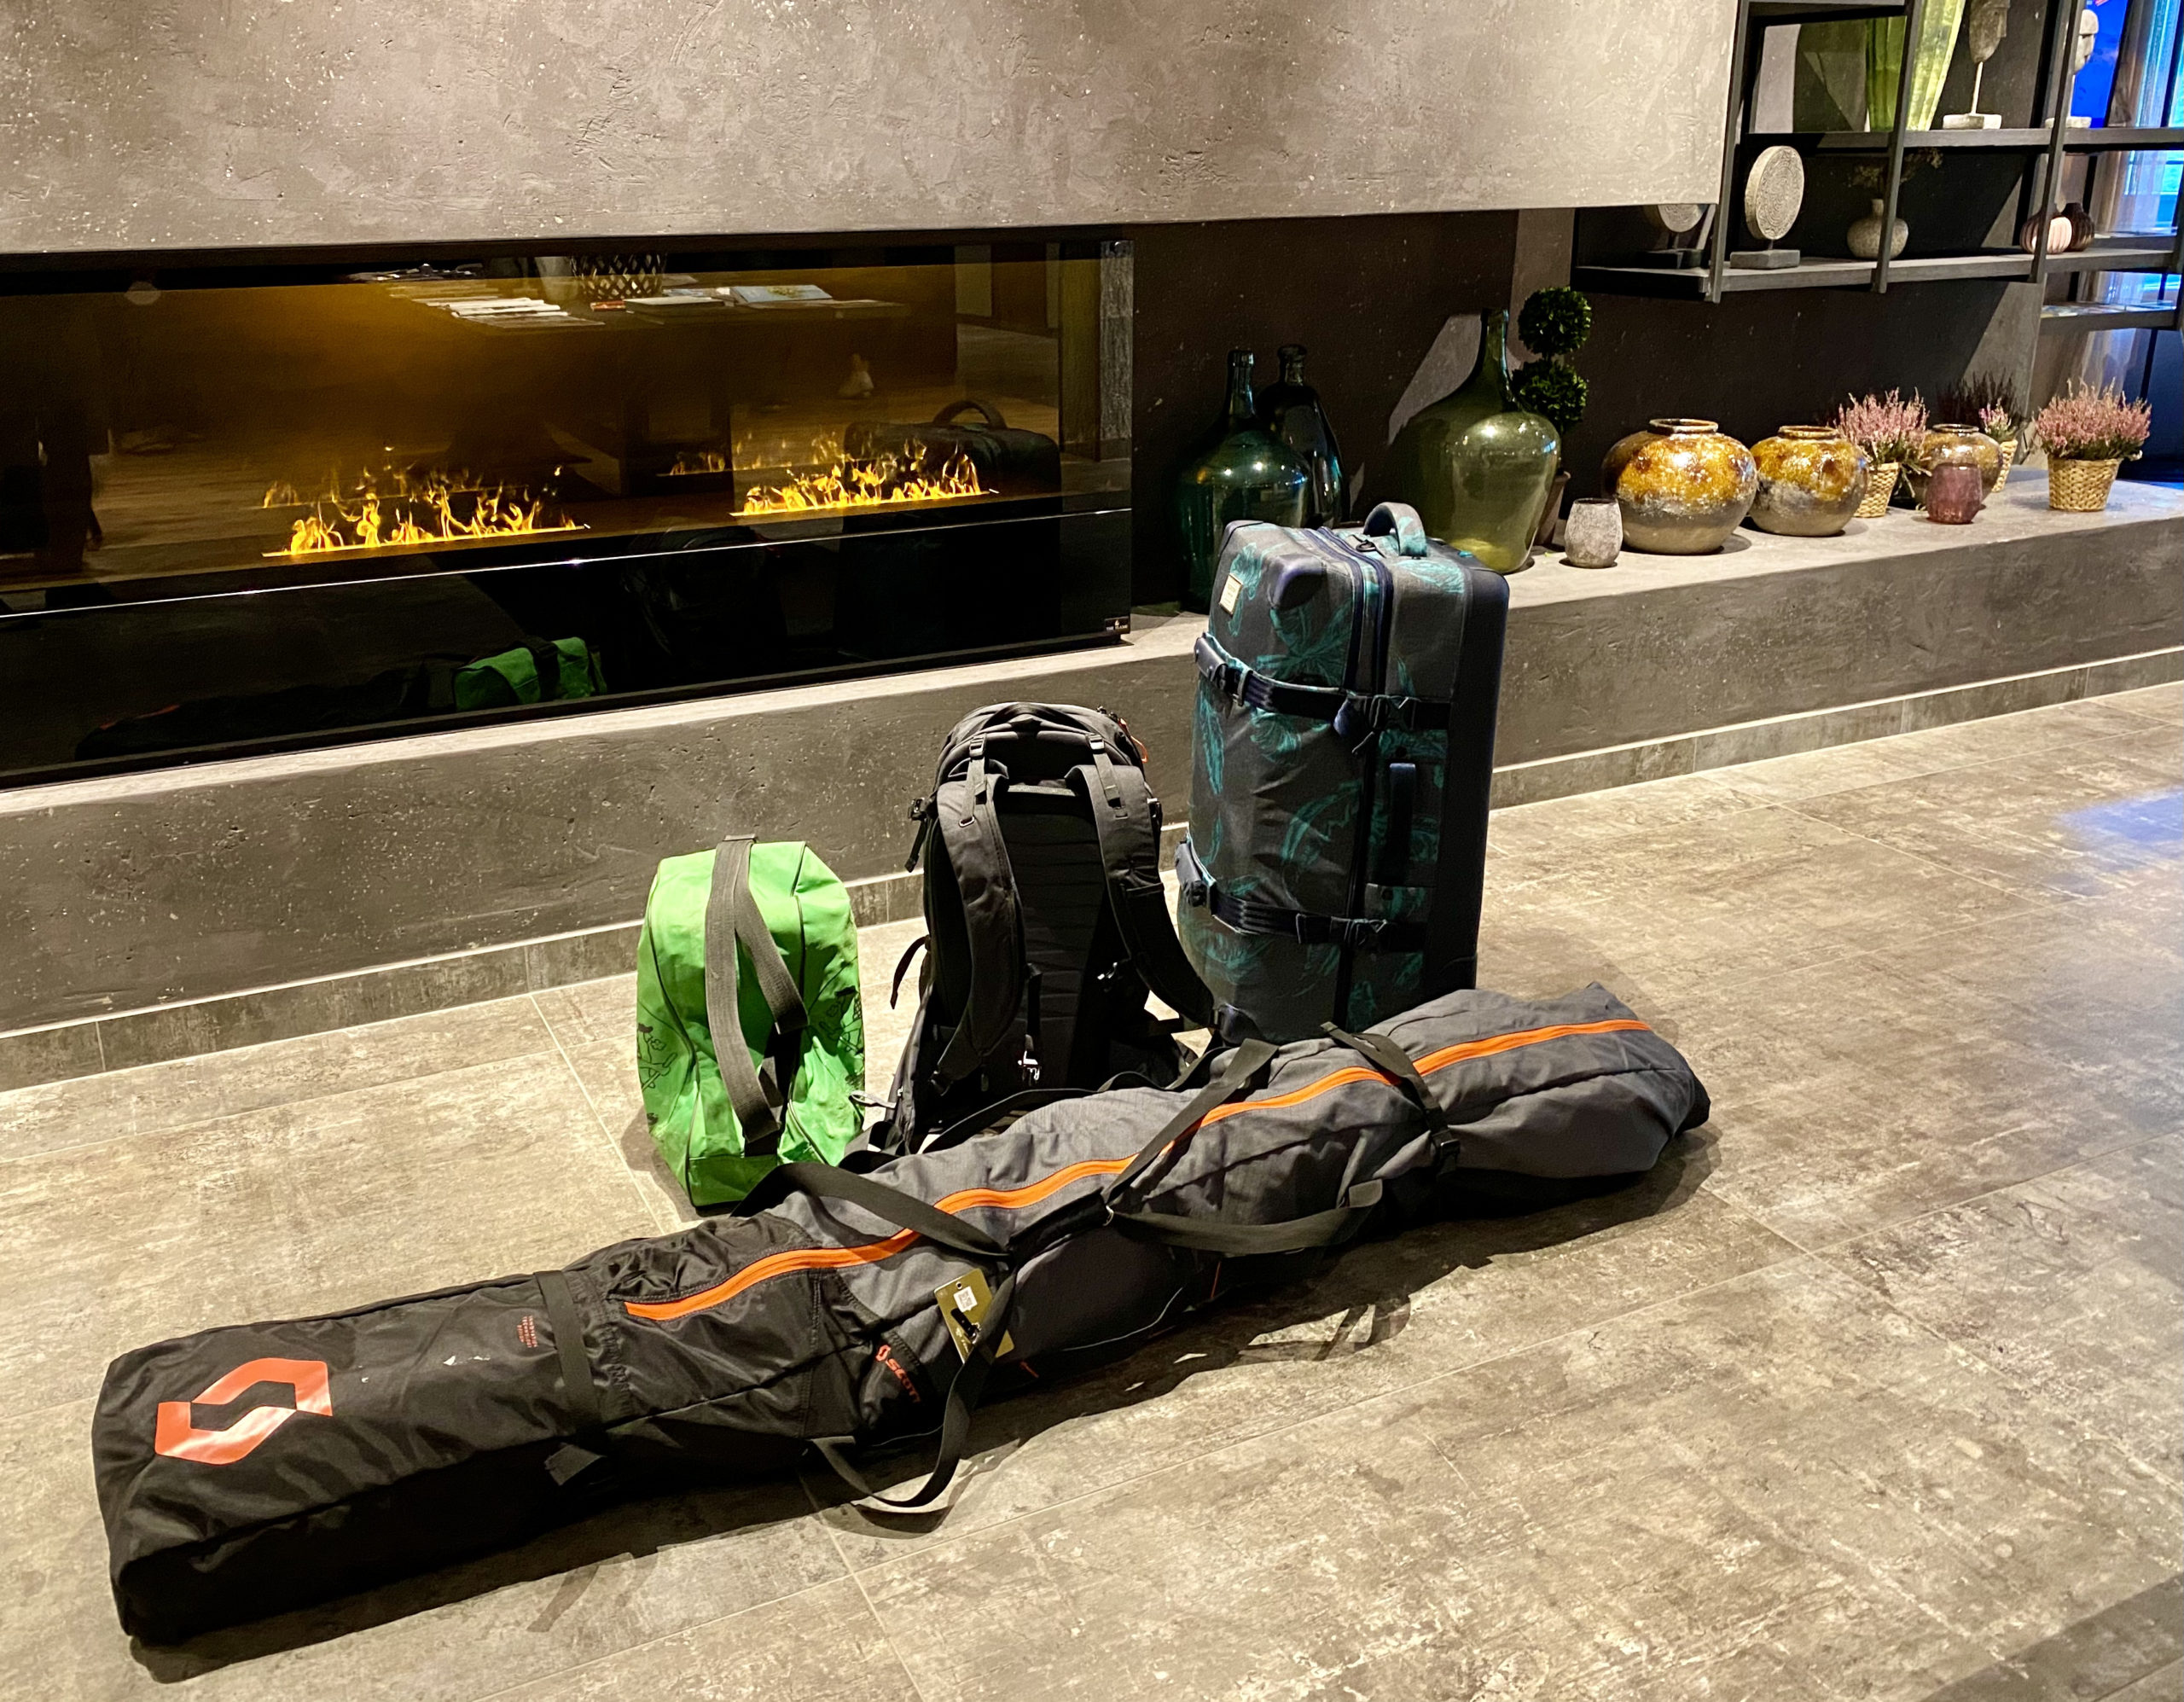 If I don't have a soft suitcase, can I take a hard case? – Wasteland Ski